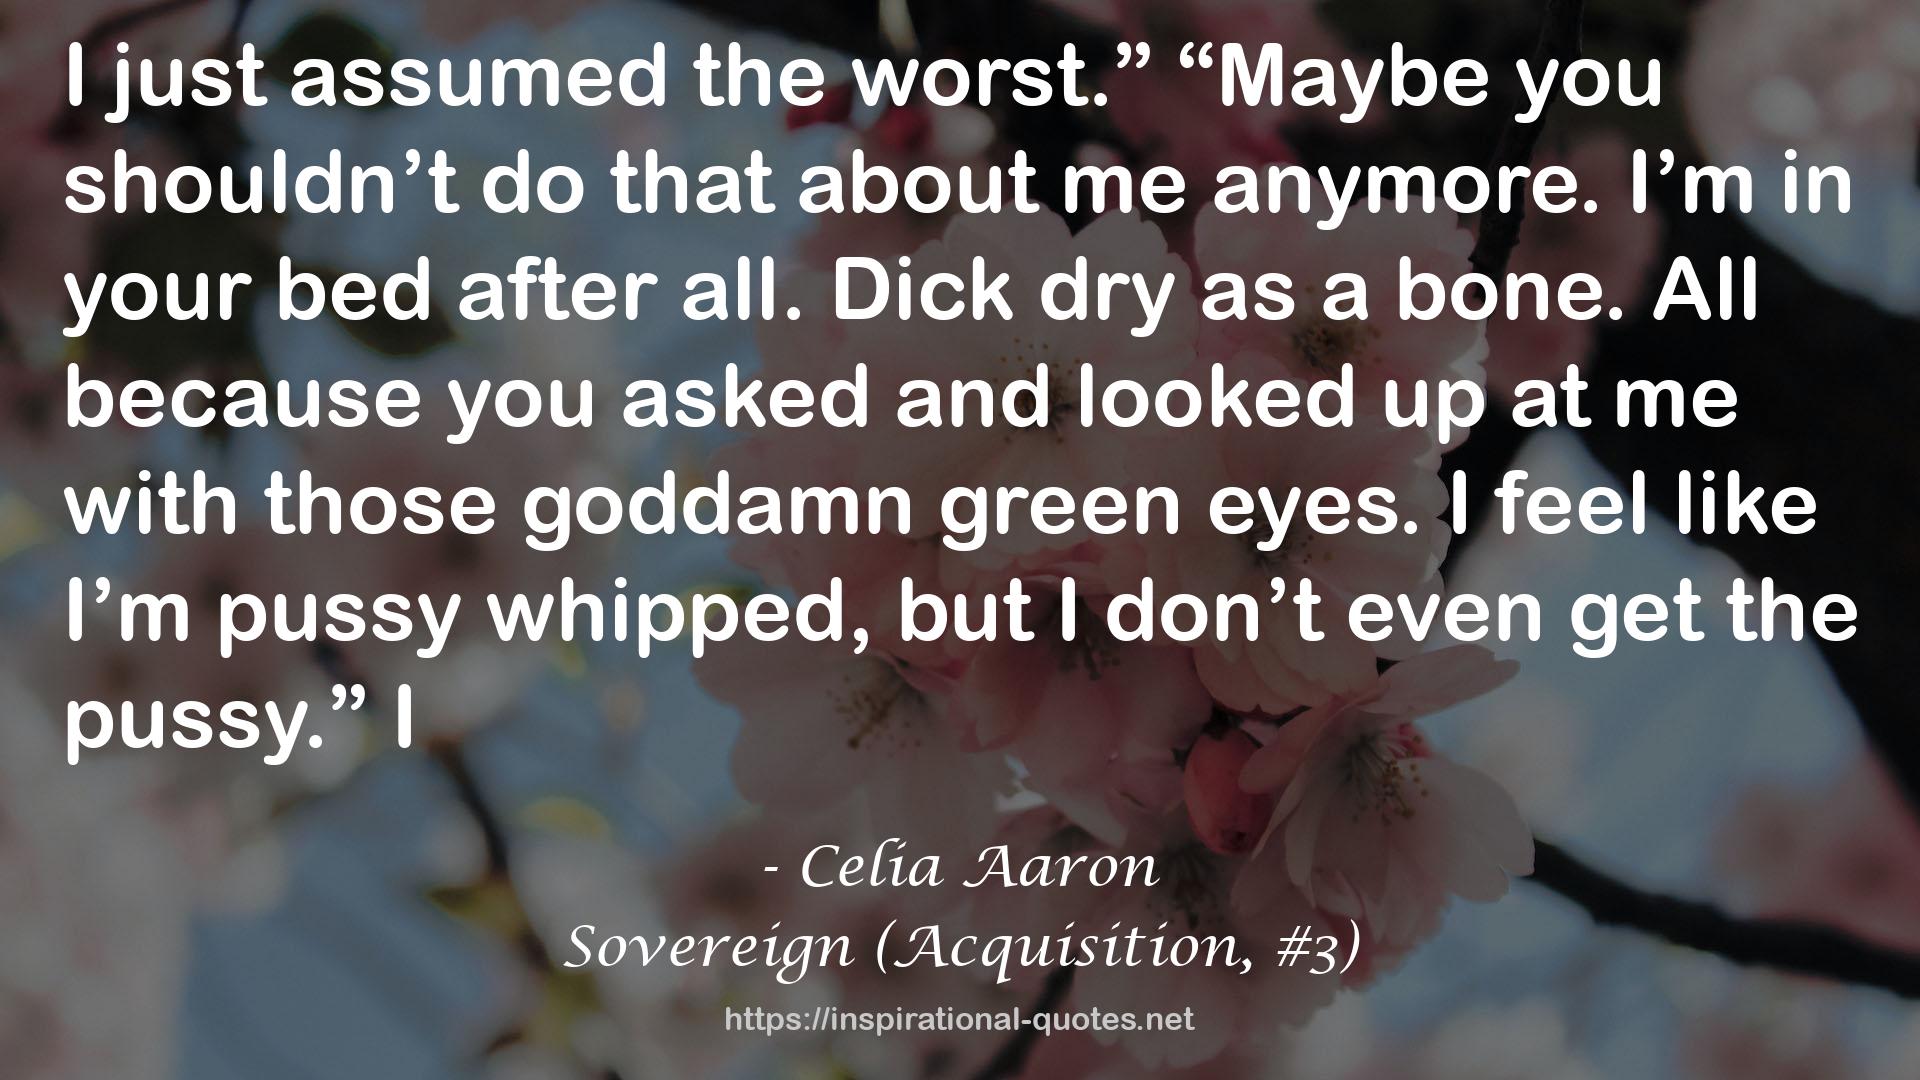 Sovereign (Acquisition, #3) QUOTES